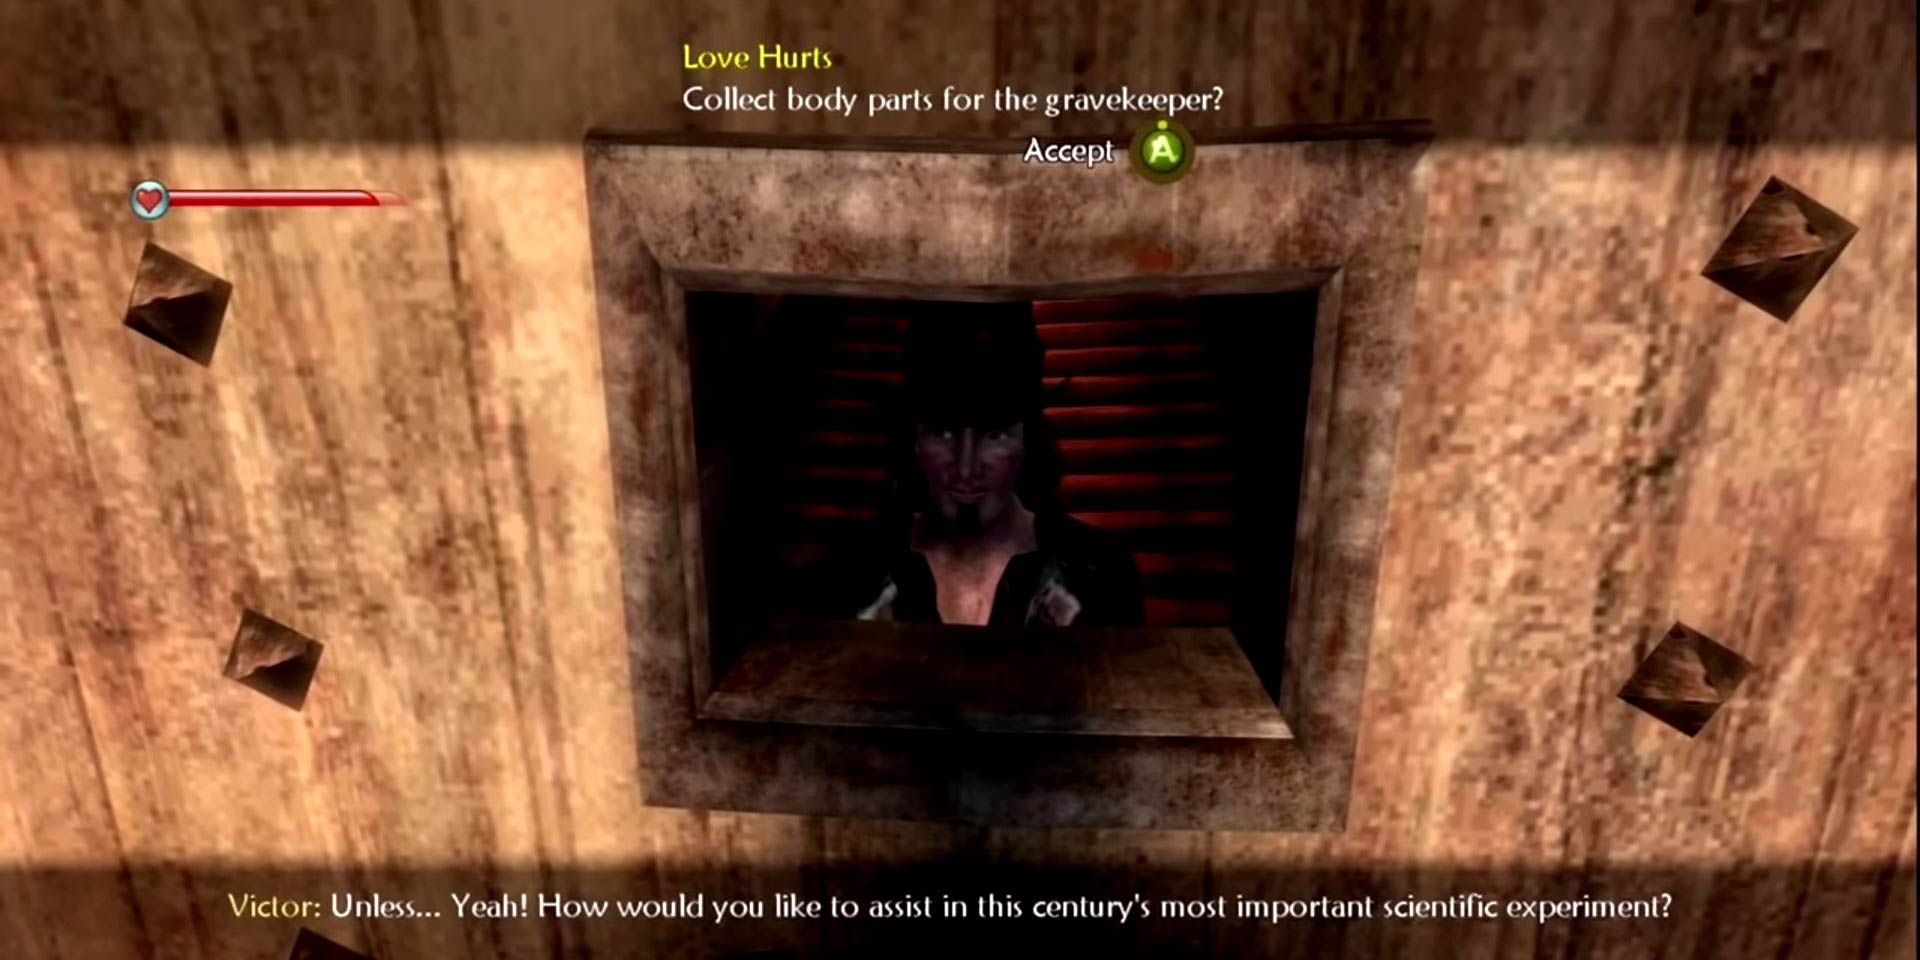 A shady grave keeper propositioning the player in Fable 2 from behind a door.